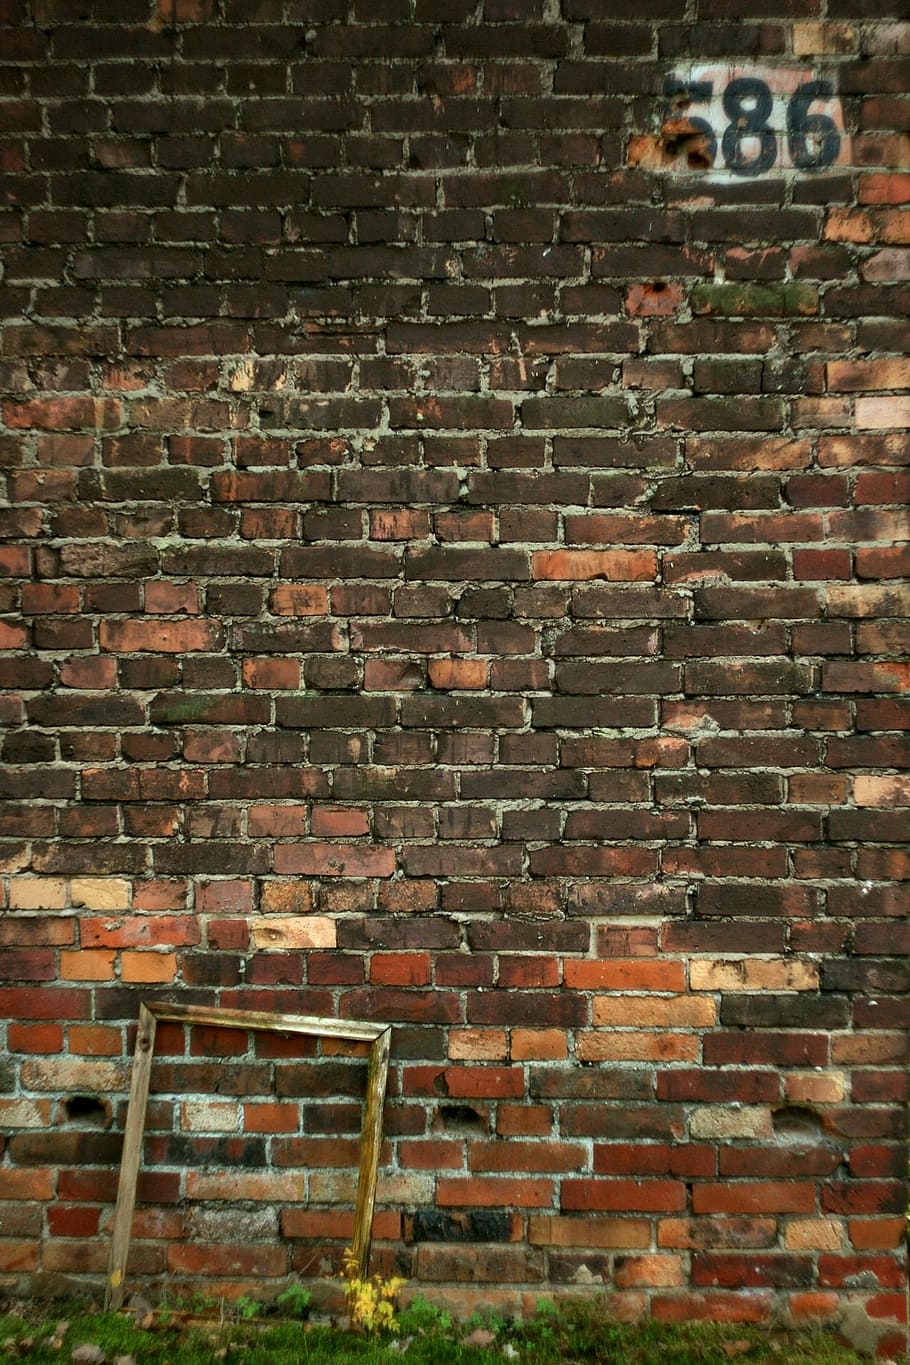 wall, brick, construction, building, number, old, backgrounds, wall - Building Feature, brick Wall, red